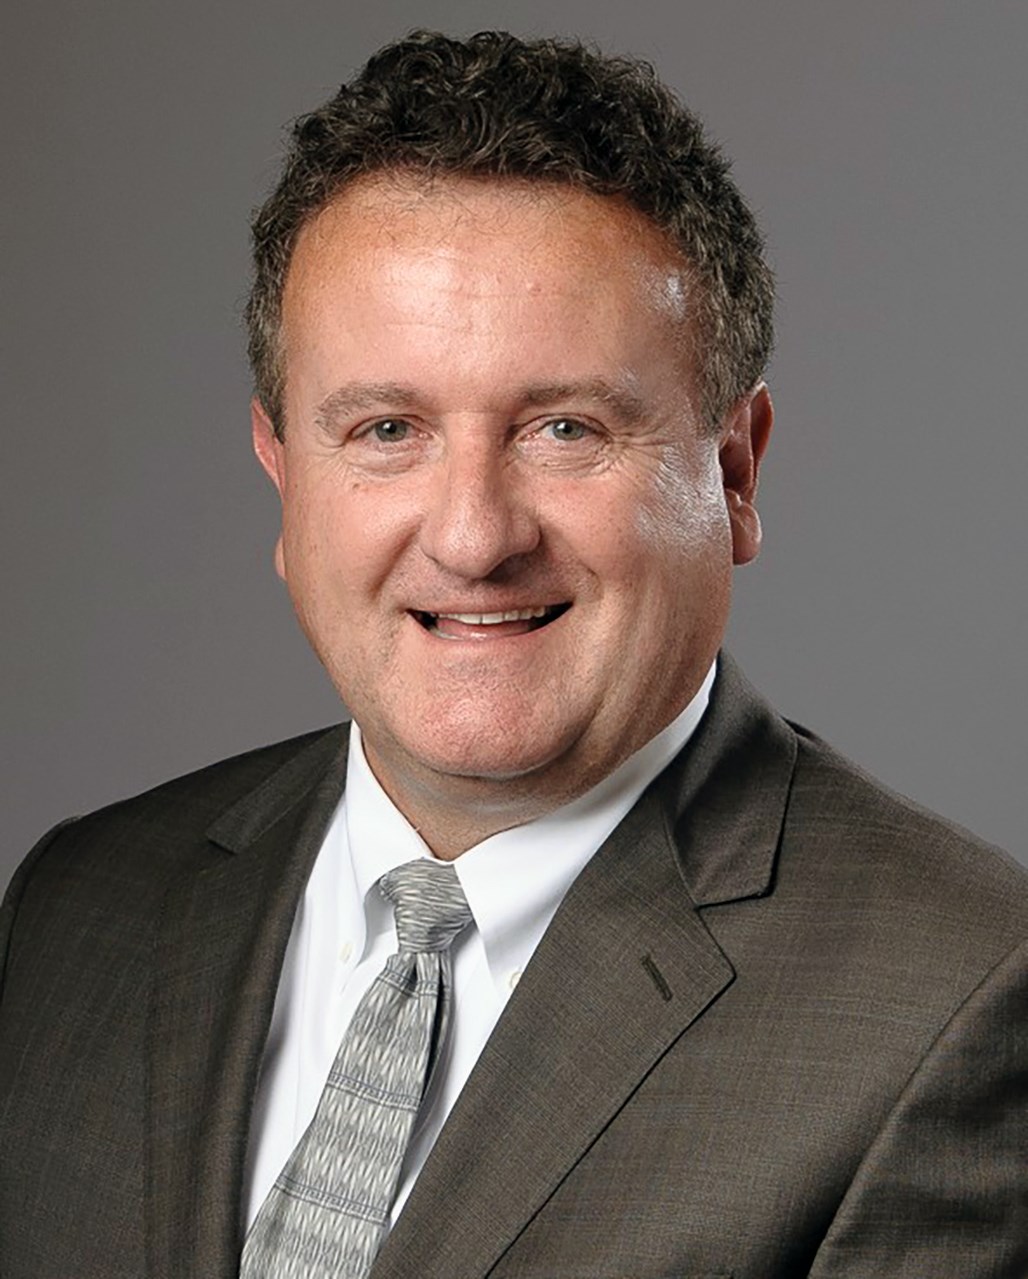 Michael Cipriano is the Associate Vice Chancellor, Chief Information Officer at UMass Lowell.